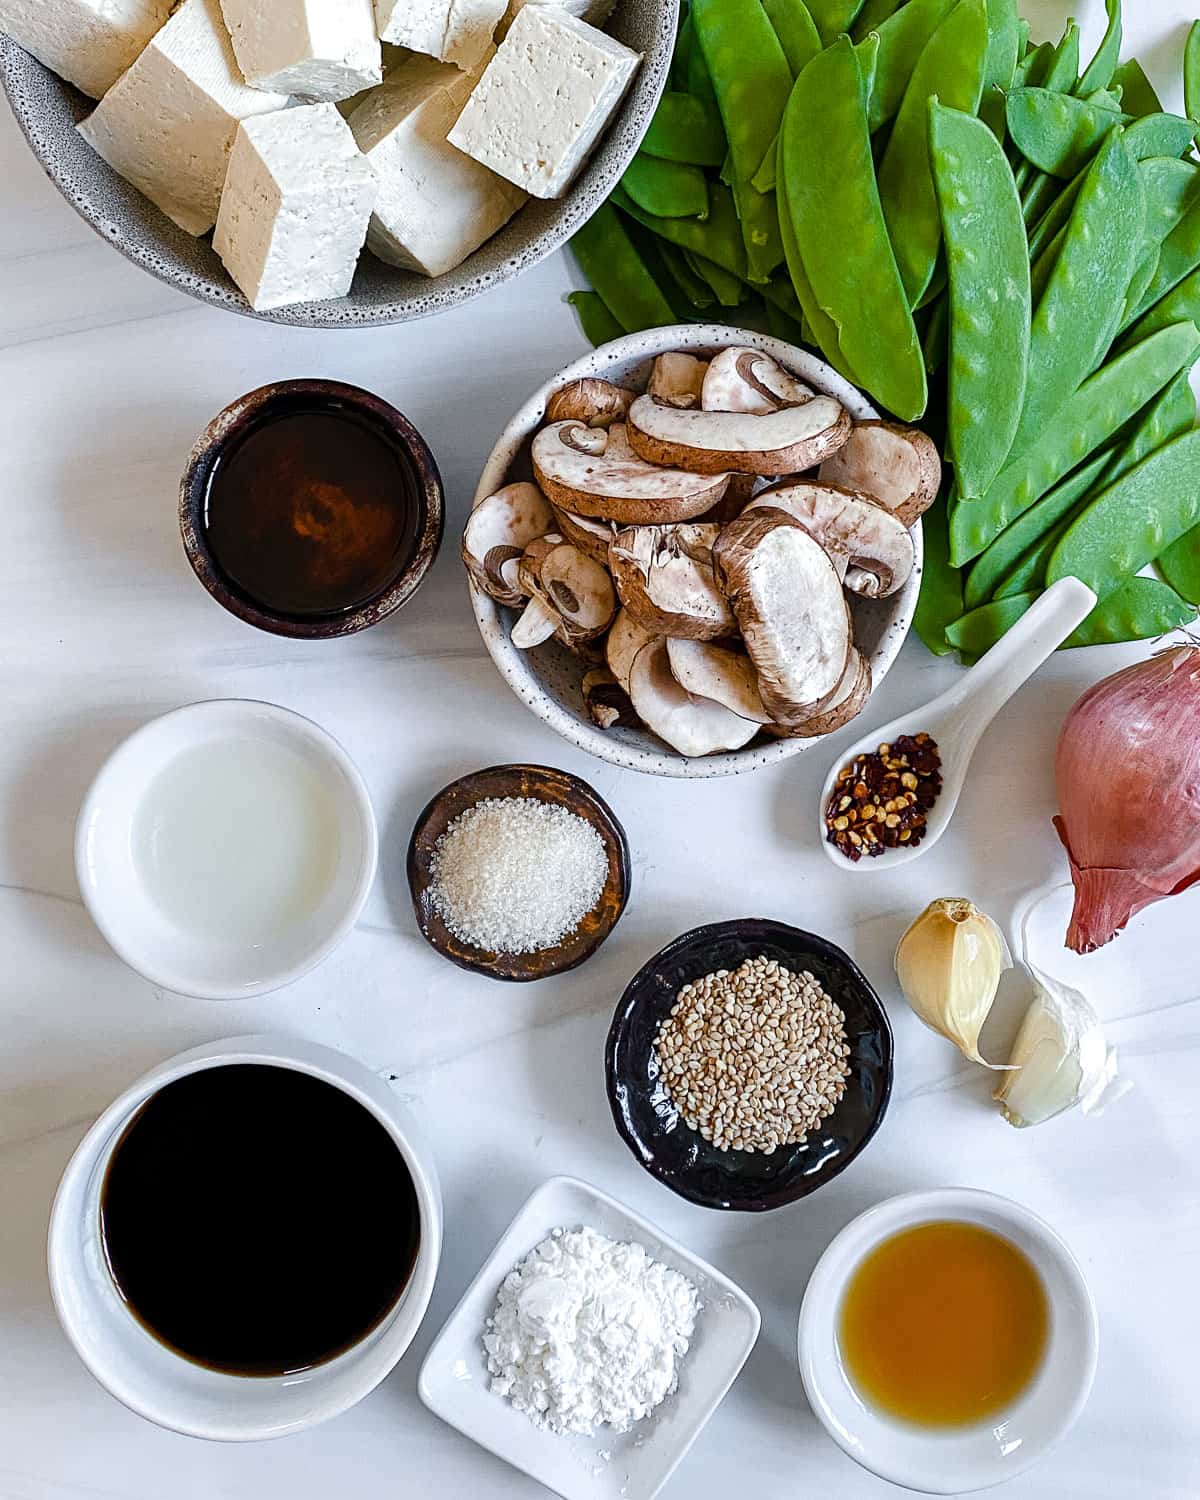 ingredients for Spicy Sesame Tofu Stir-fry measured out on a white surface